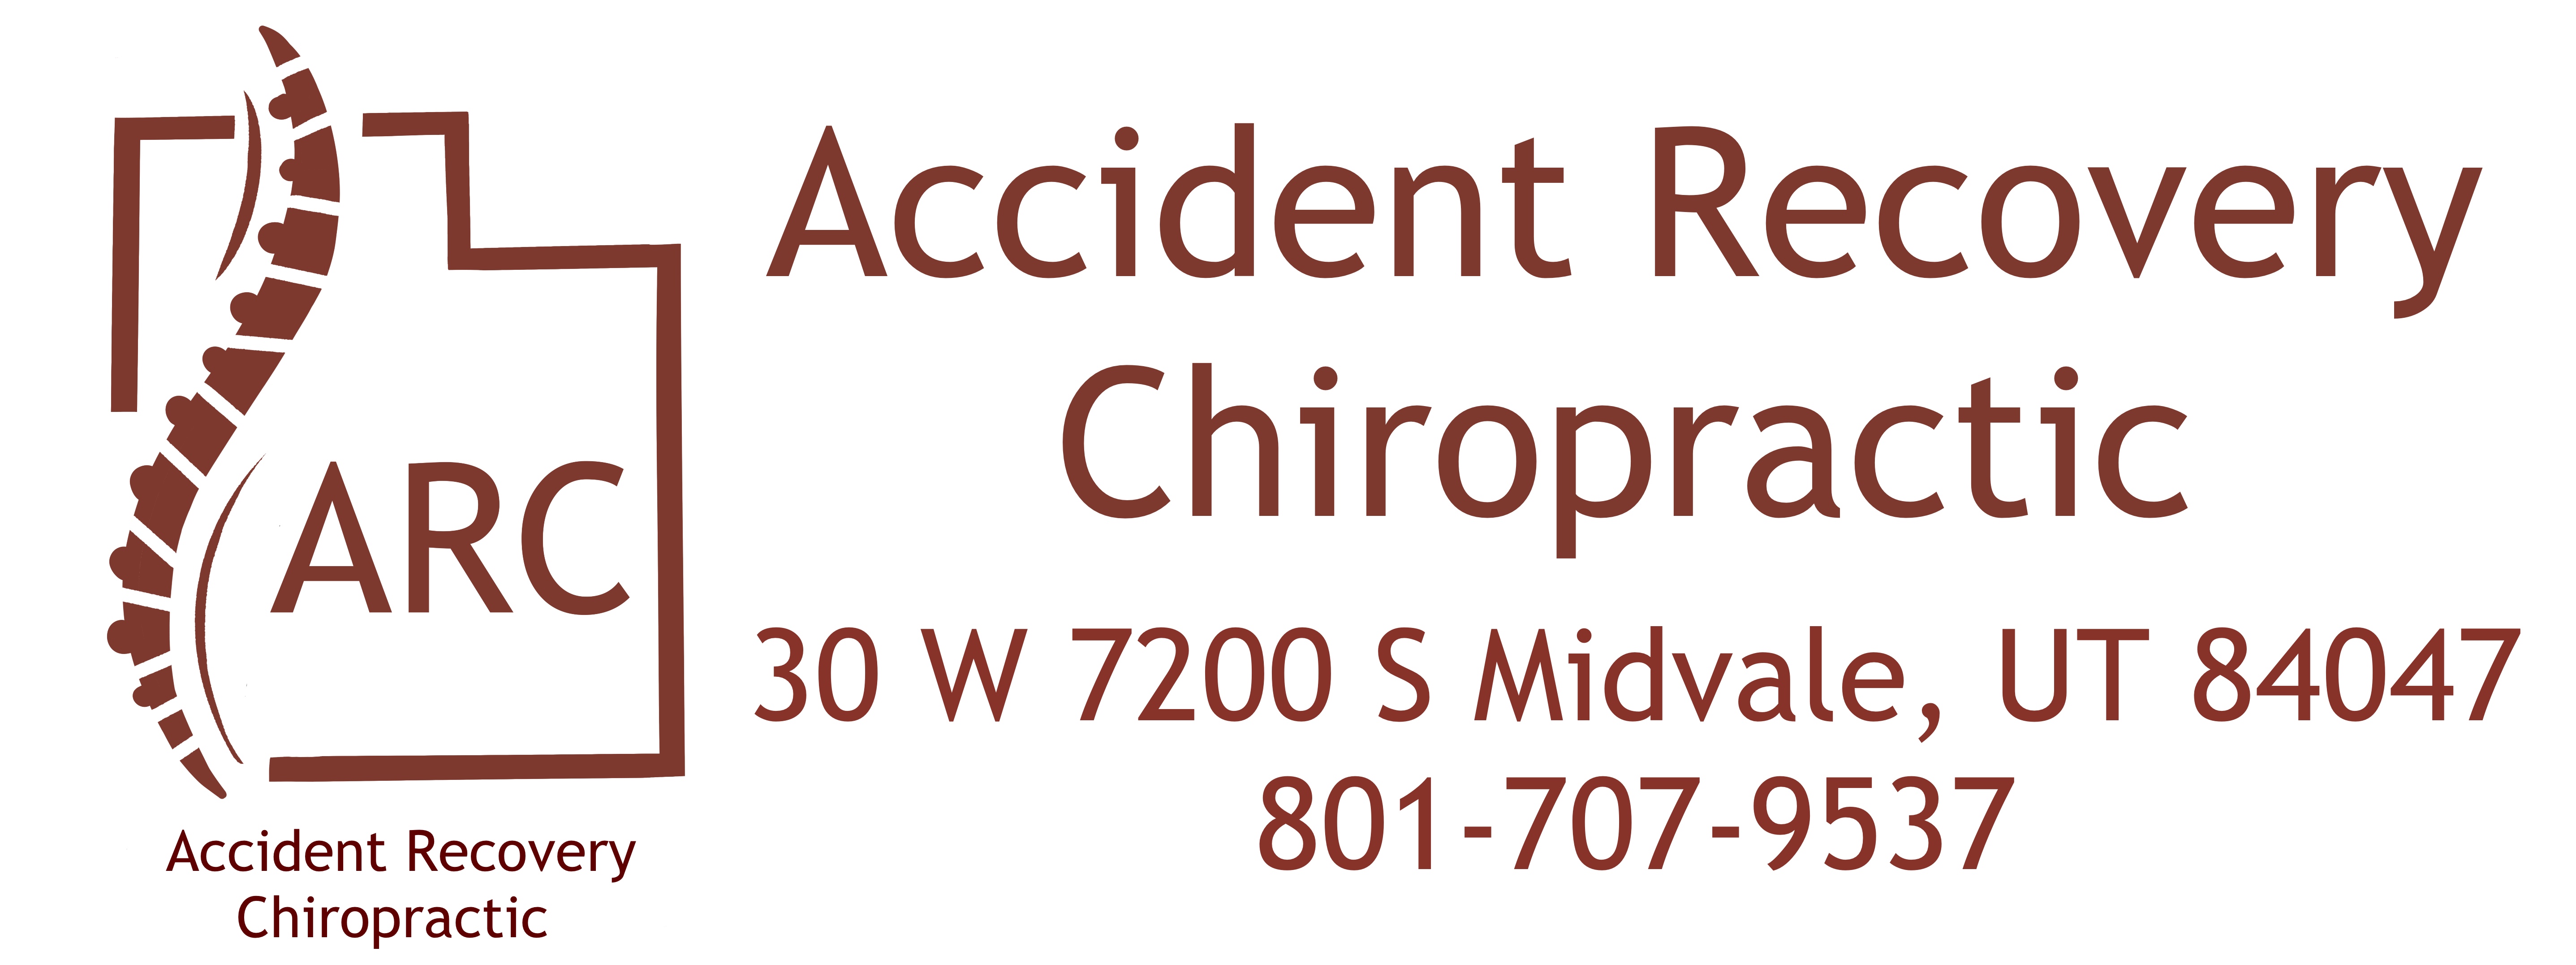 Accident Recovery Chiropractic